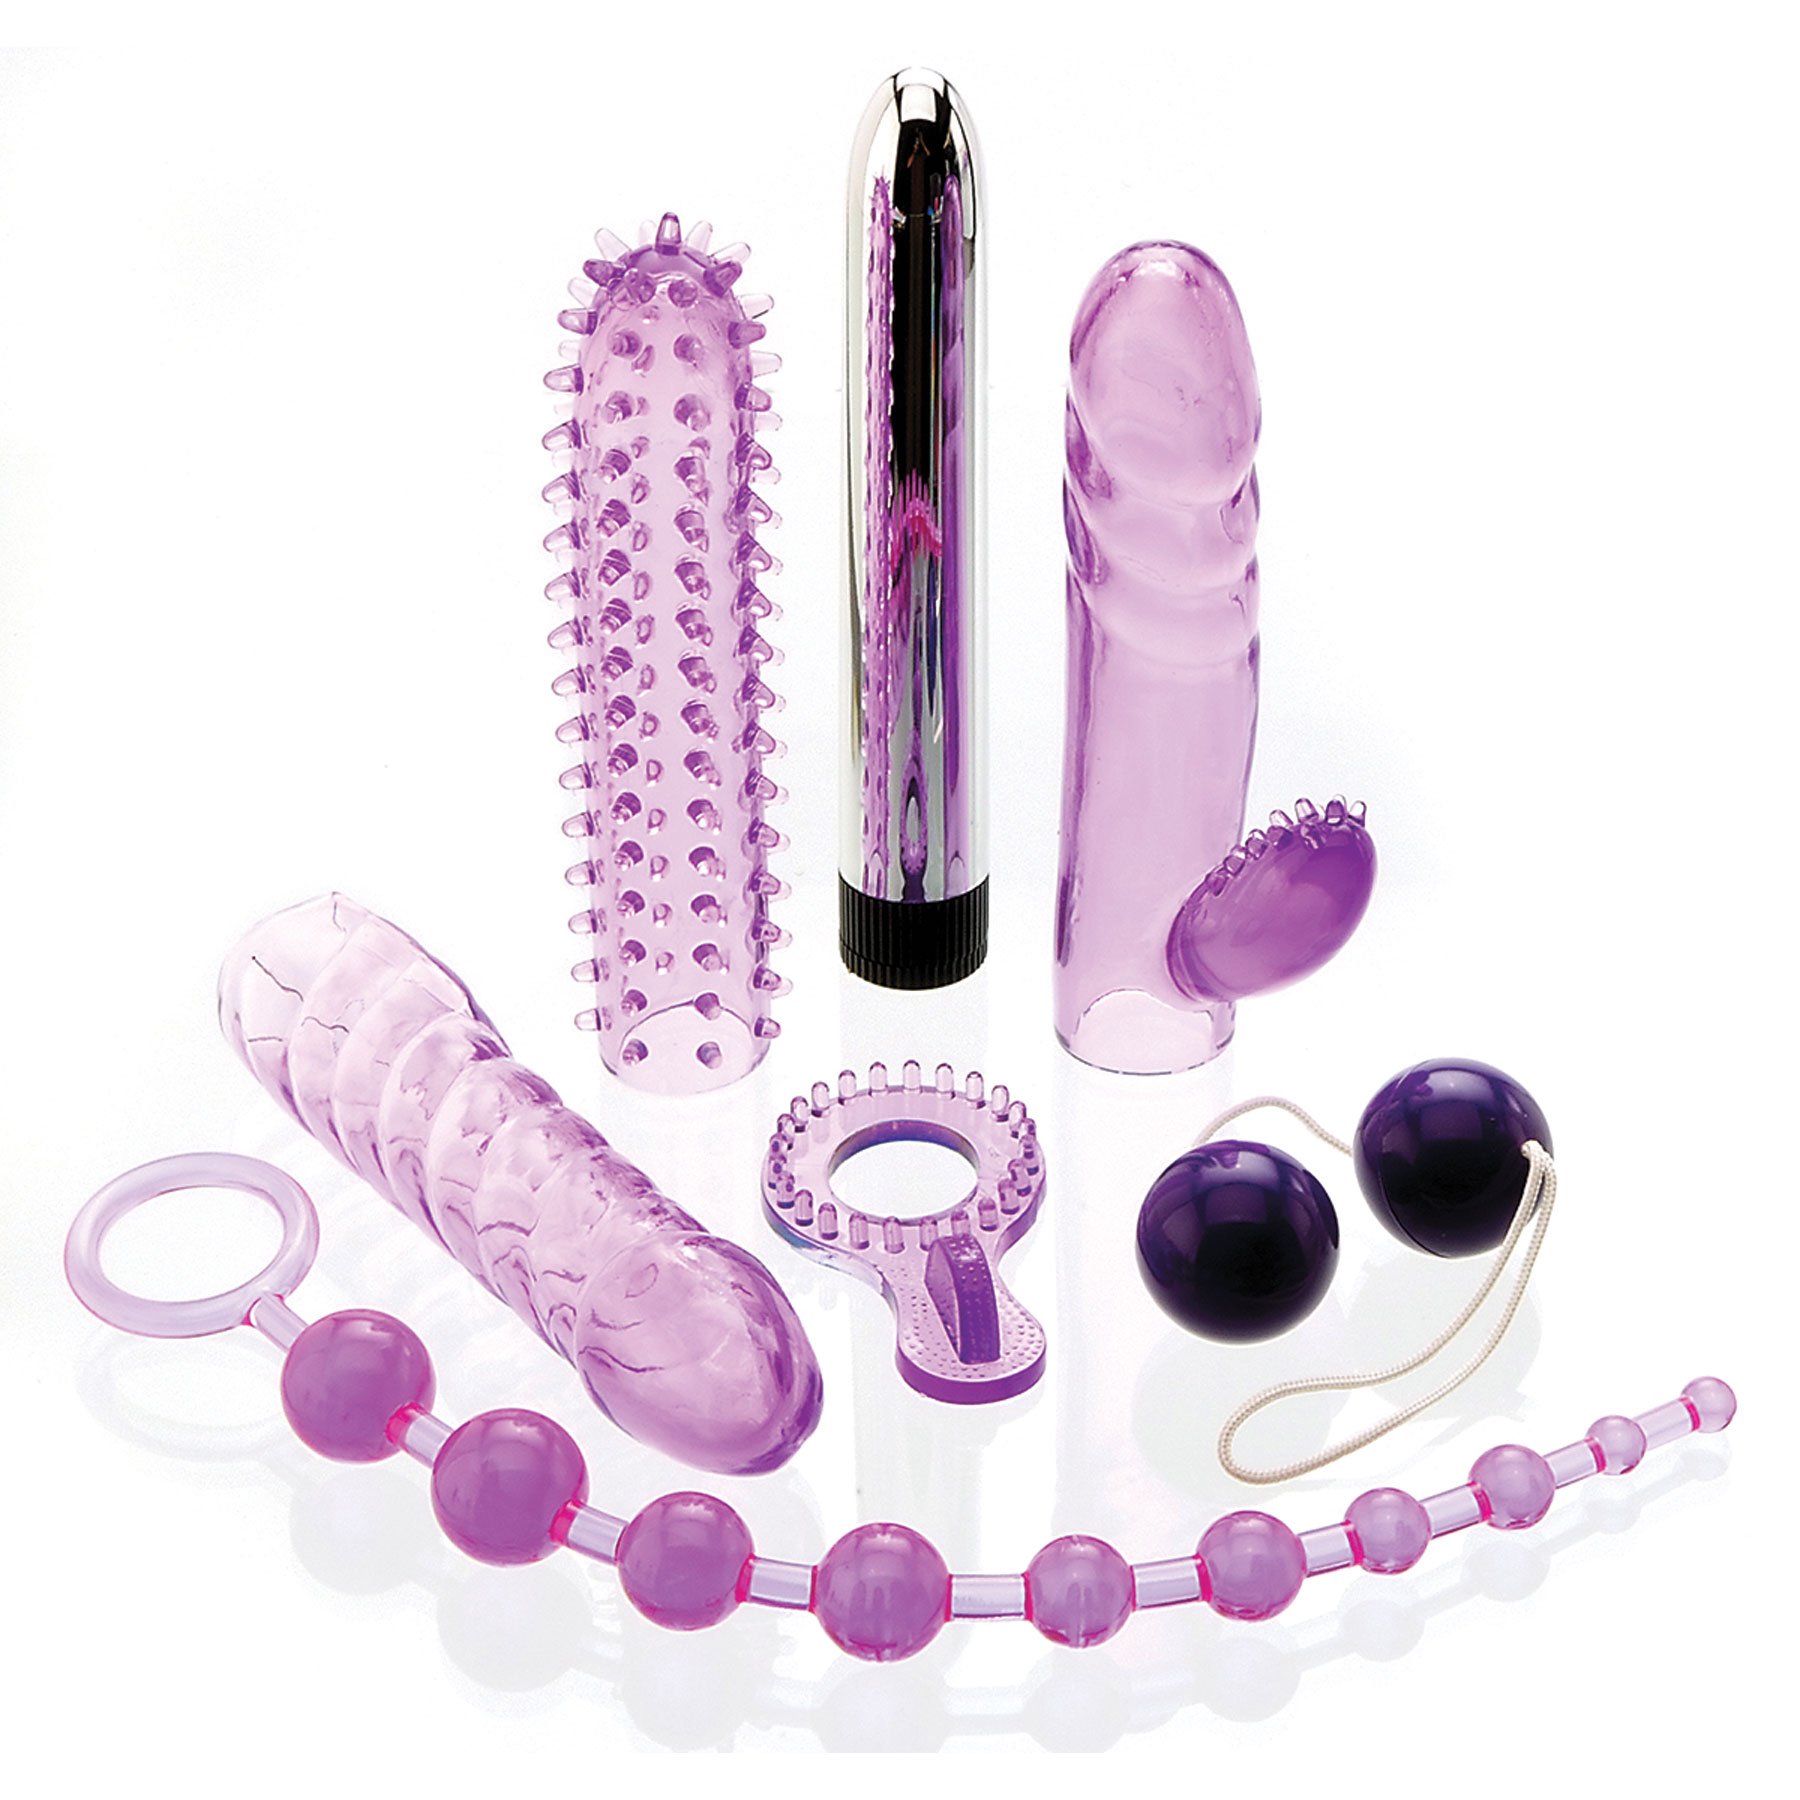 Adam And Eve Adult Toys